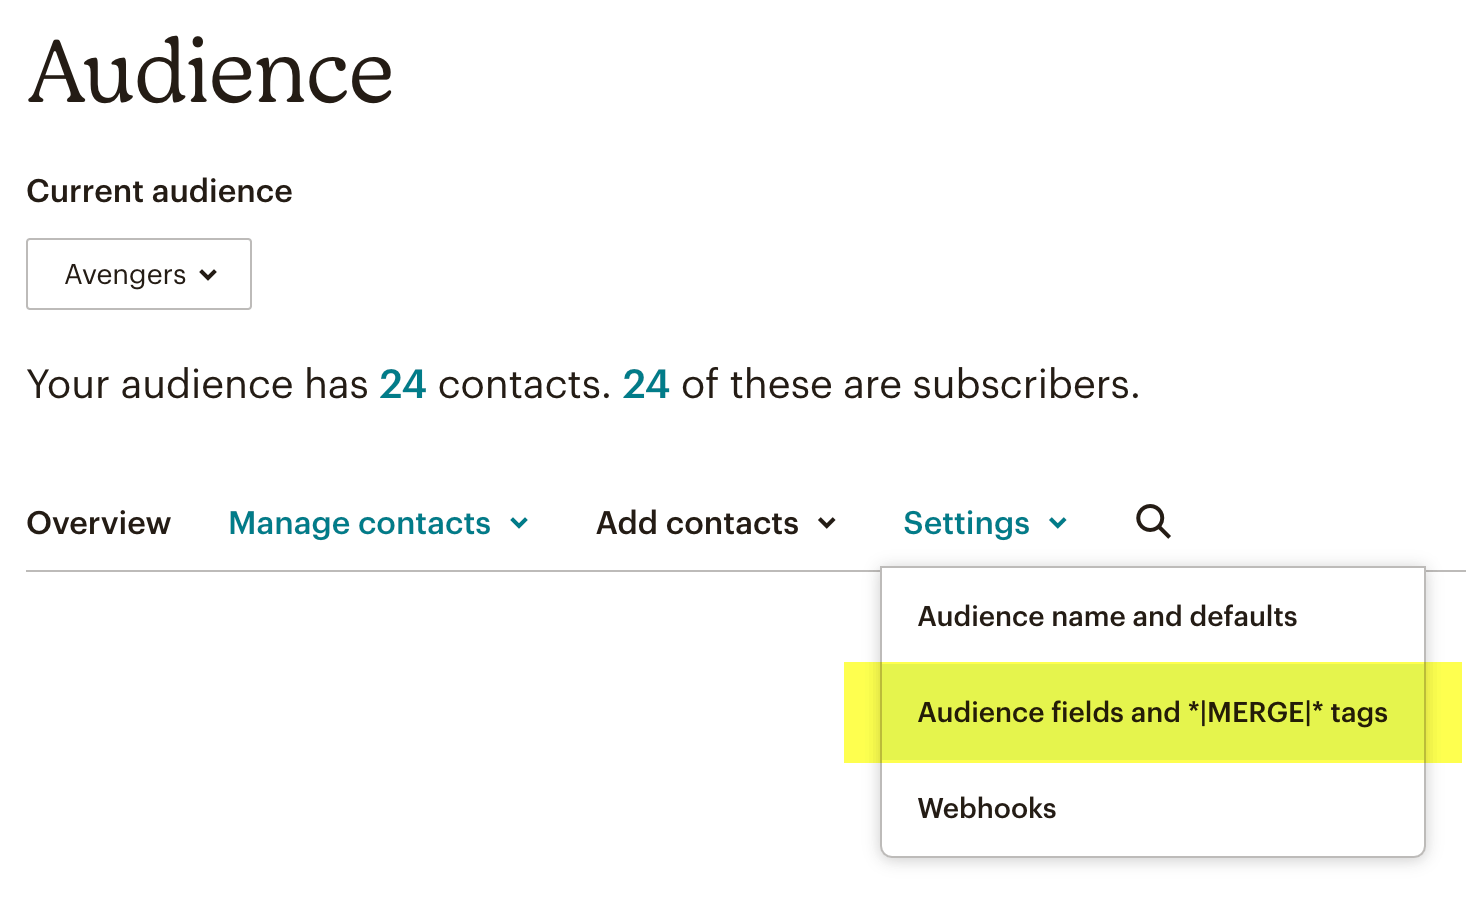 Find Mailchimp audience fields and merge tags